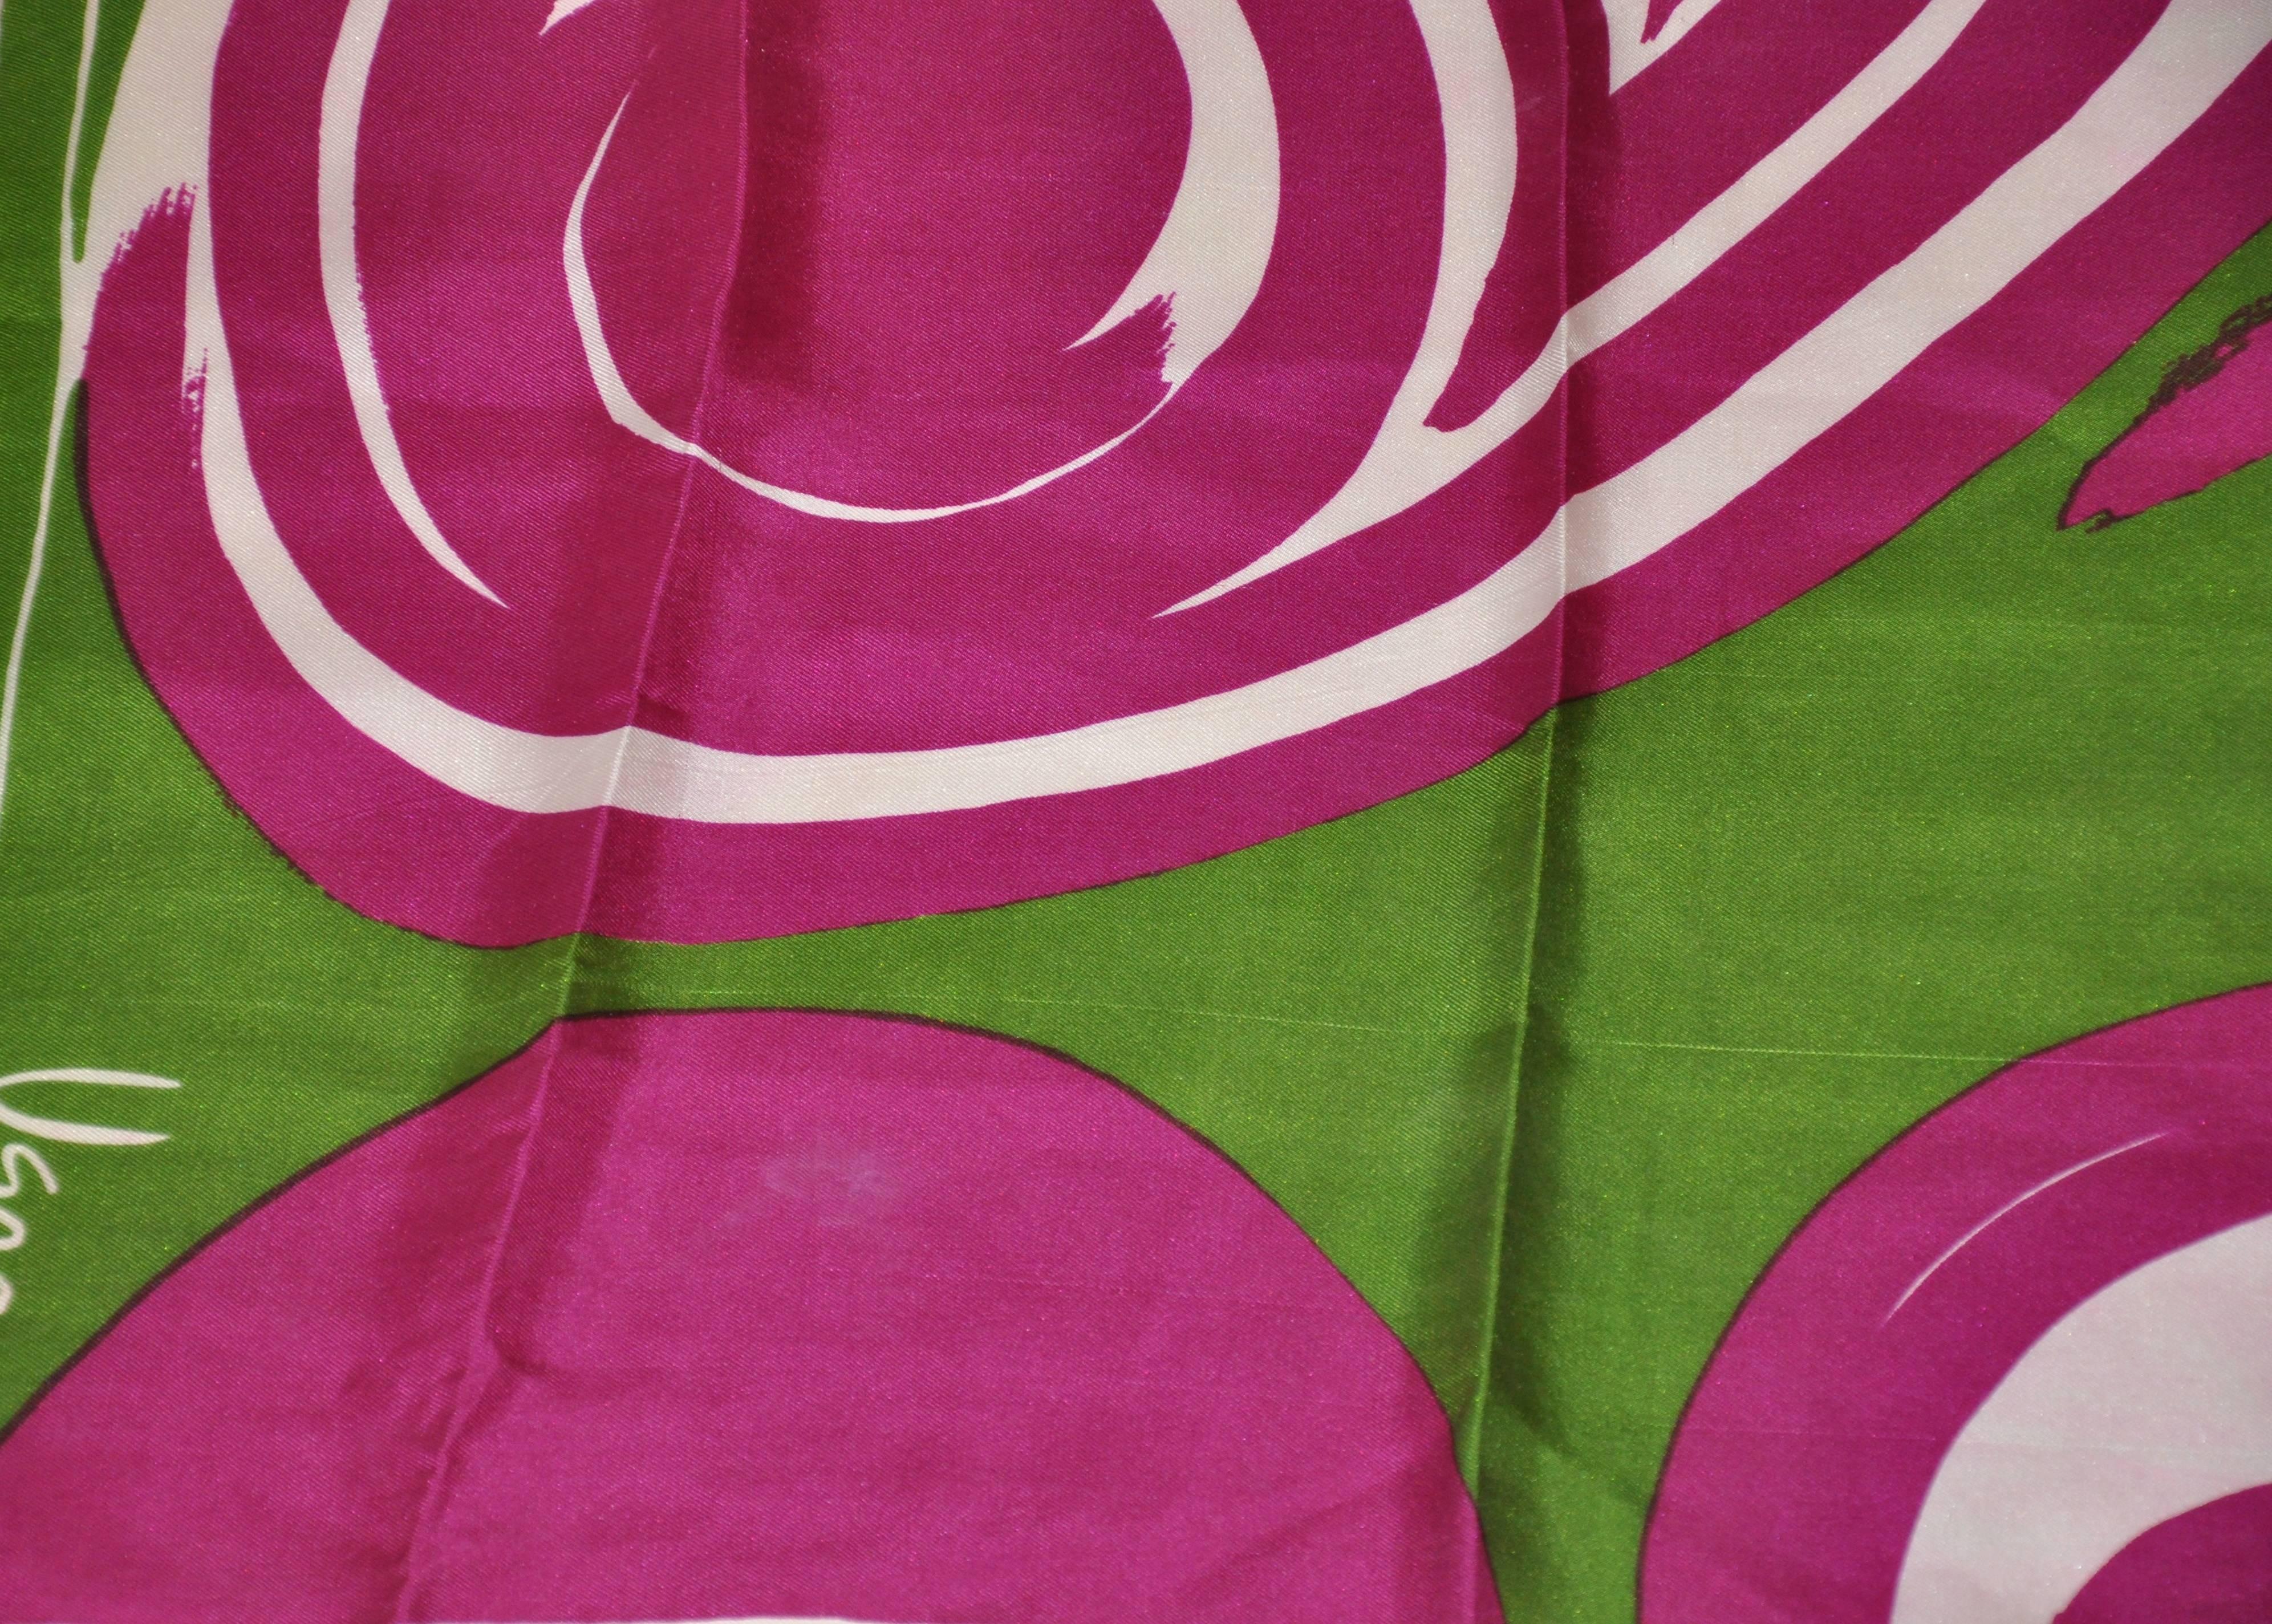 Vera "Olive with Plum circles" silk scarf measures 15" x 44" and finished with hand-rolled edges. Made in USA.